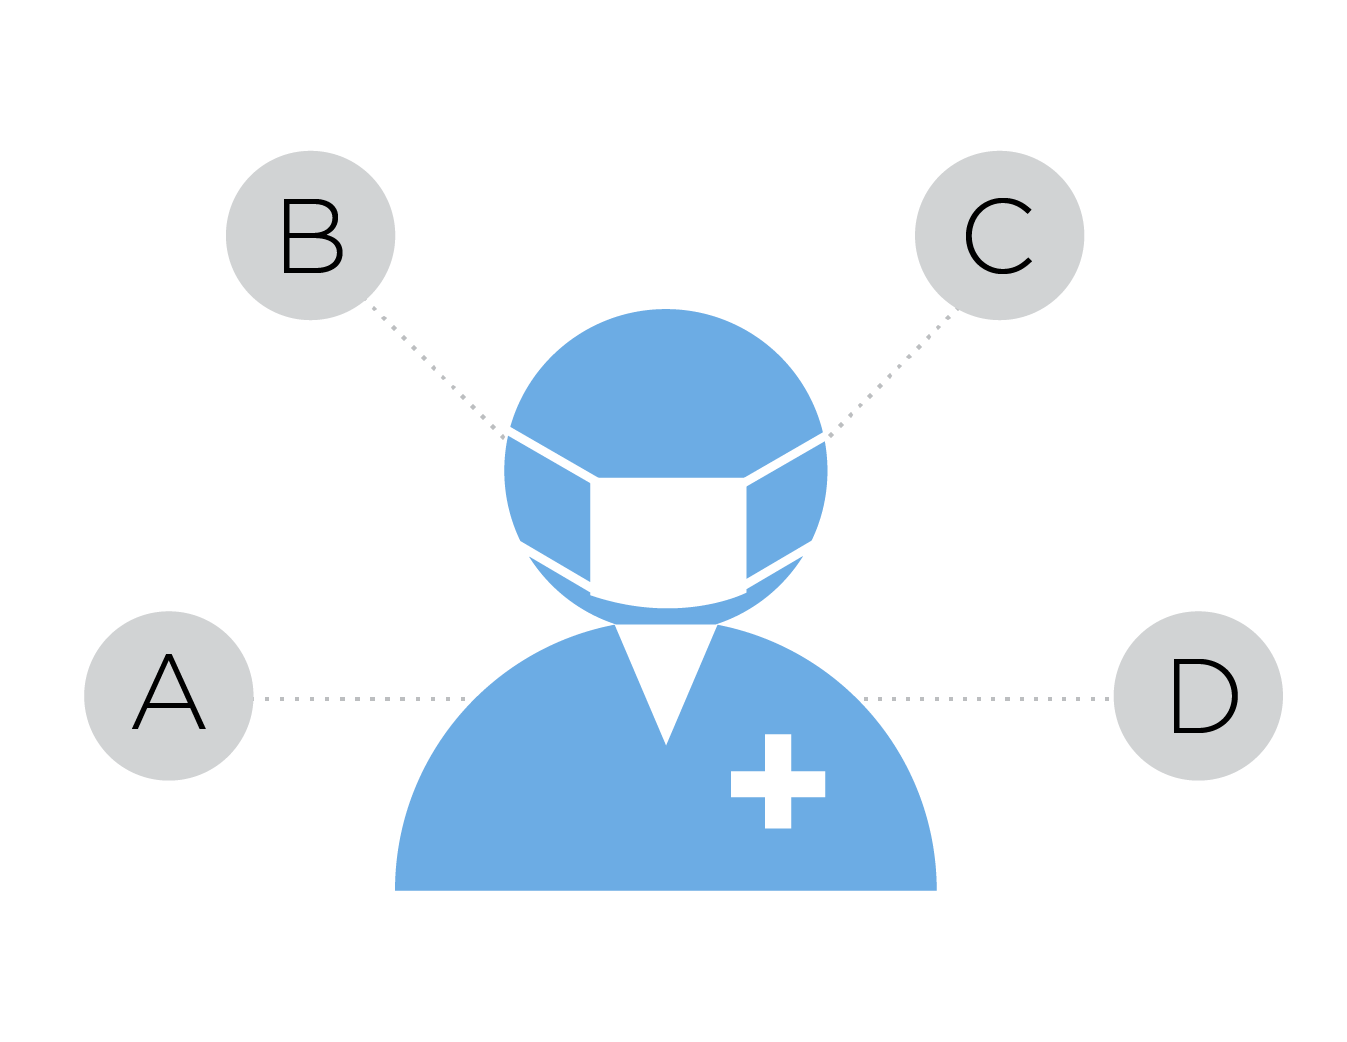 Solid drawing of surgeon with gray dotted lines pointing to A,B,C,D options around